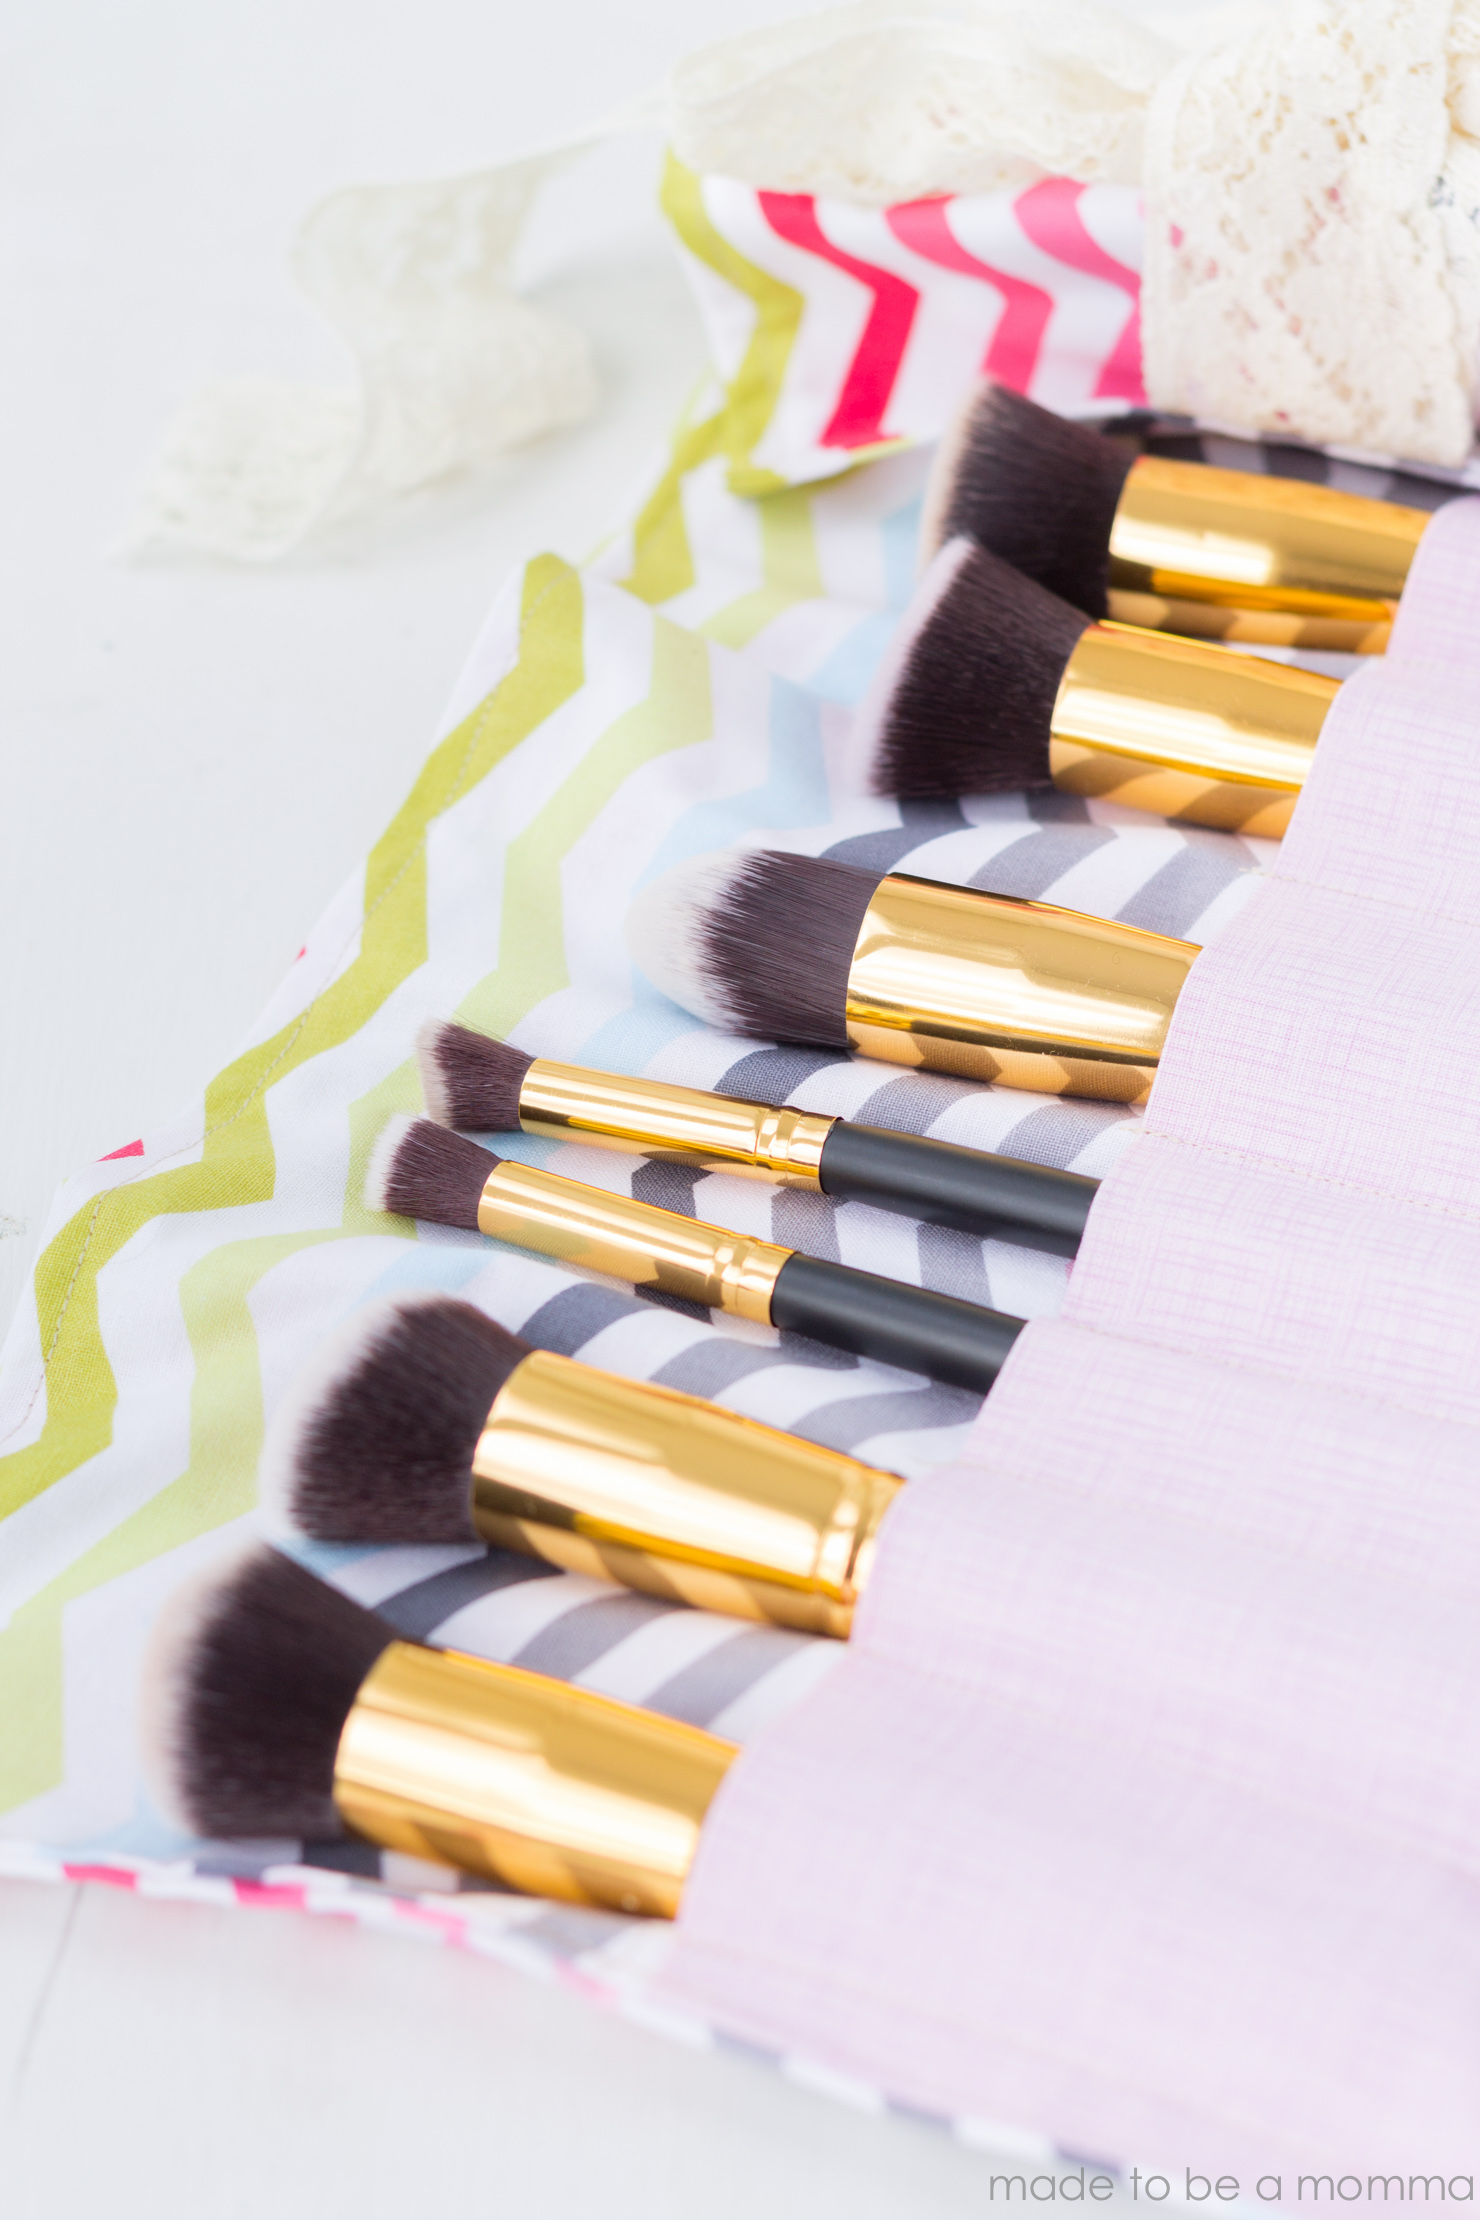 Makeup Brush Holder: perfect gift idea for any makeup lover! Tutorial at madetobeamomma.com